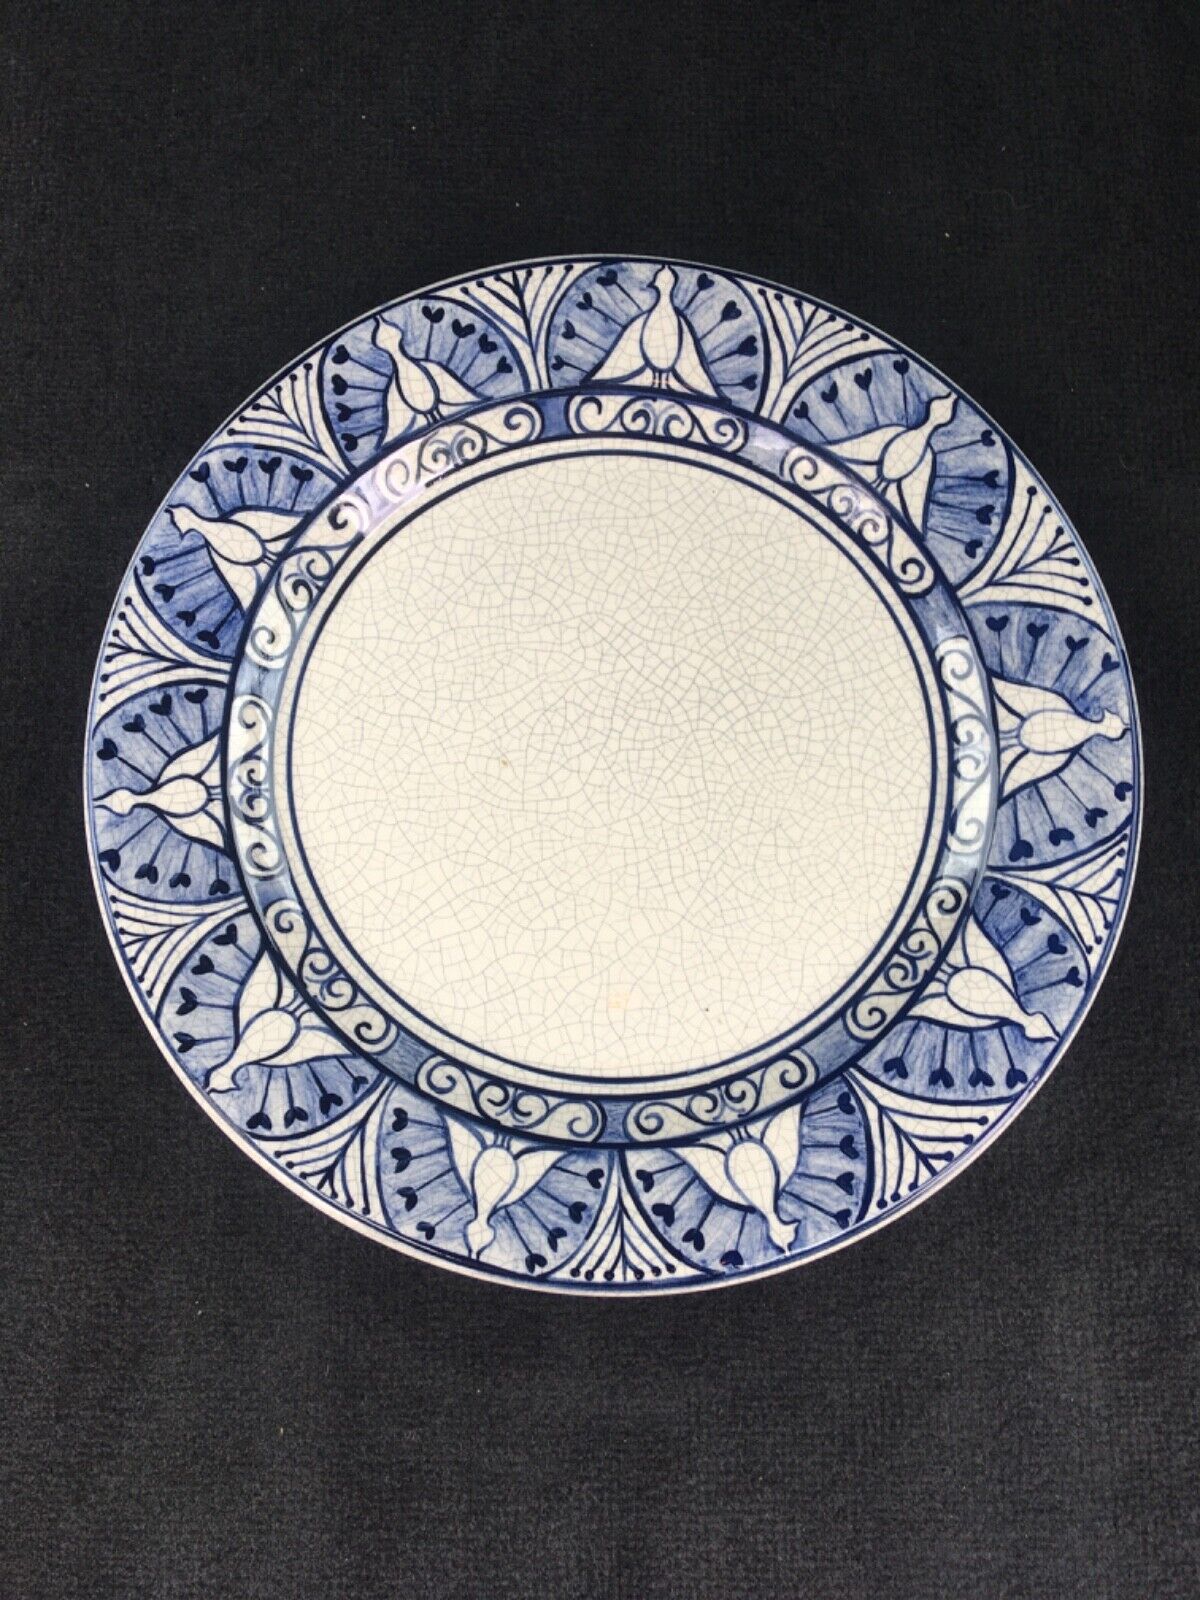 Dedham Pottery / The Potting Shed / PEACOCK PATTERN 11 1/4\